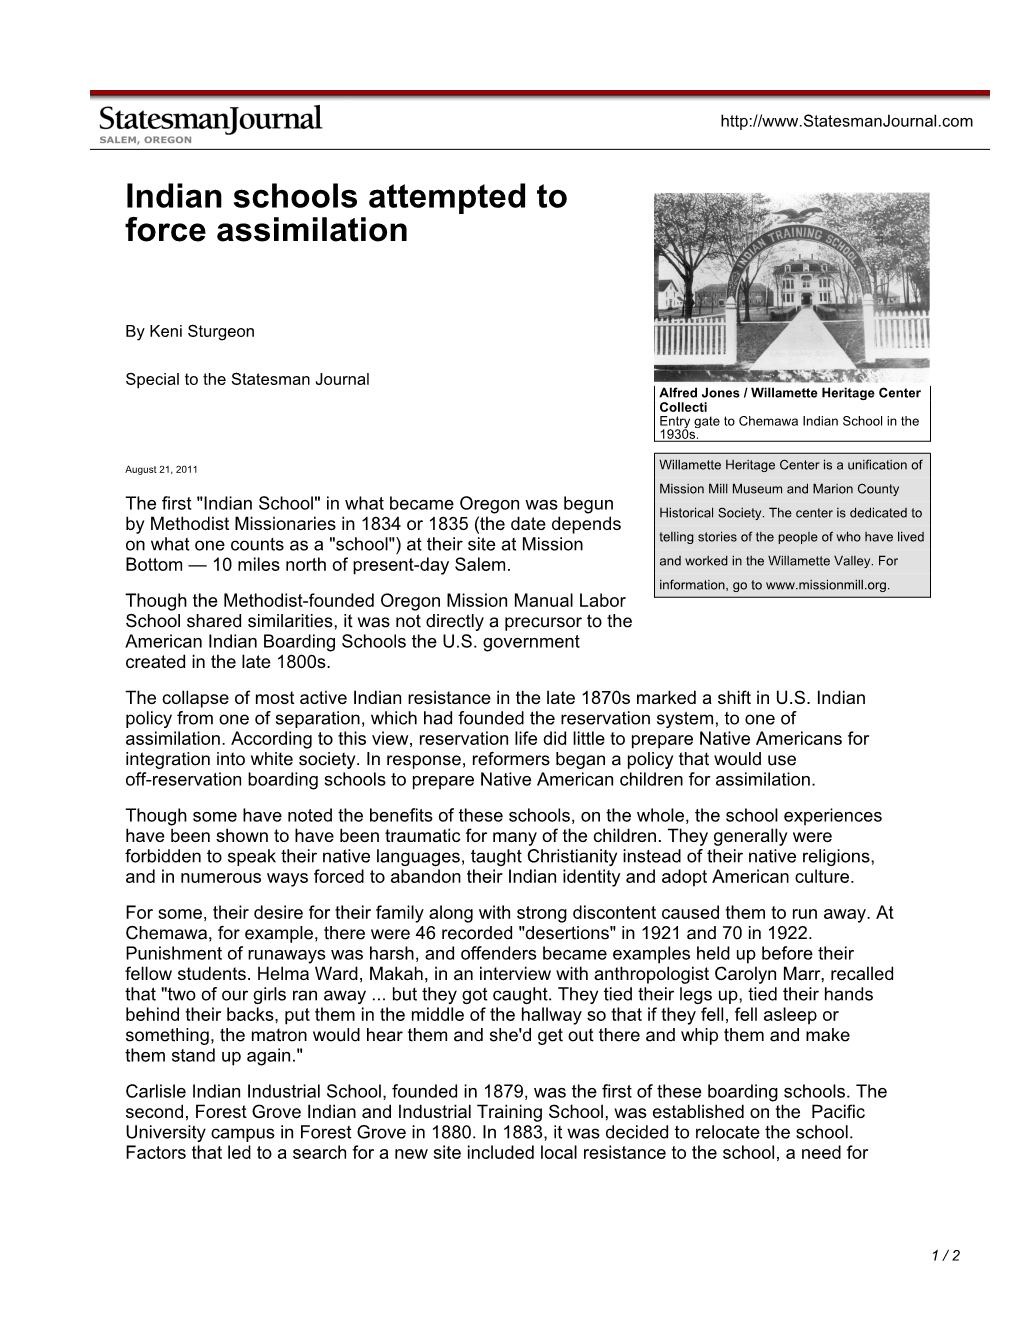 Indian Schools Attempted to Force Assimilation